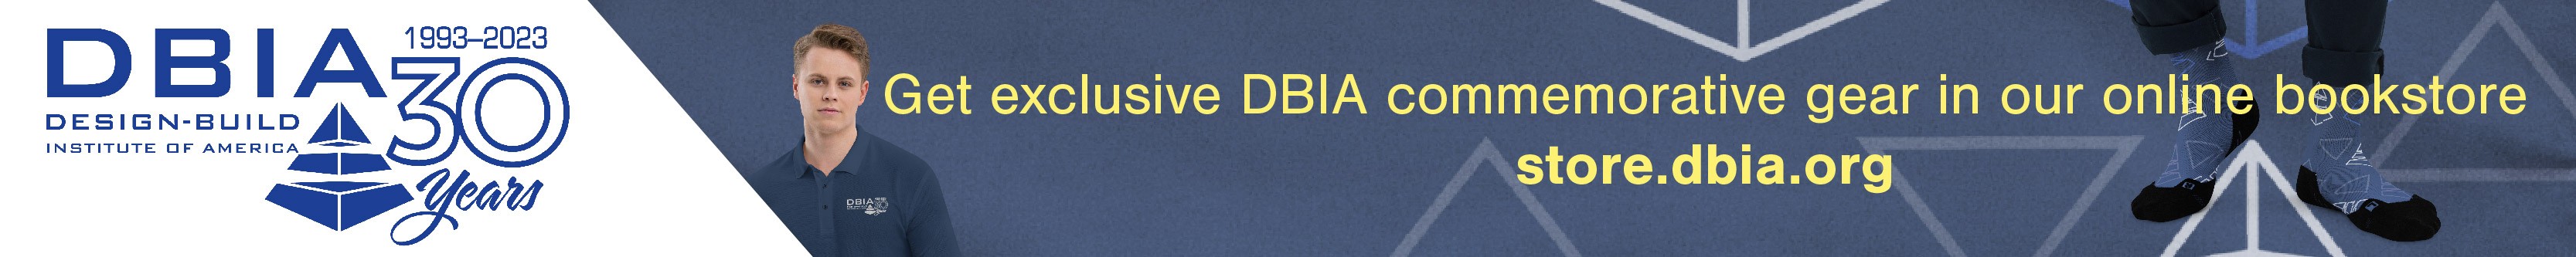 Advertisement for DBIA Bookstore; links to bookstore page for DBIA gear.